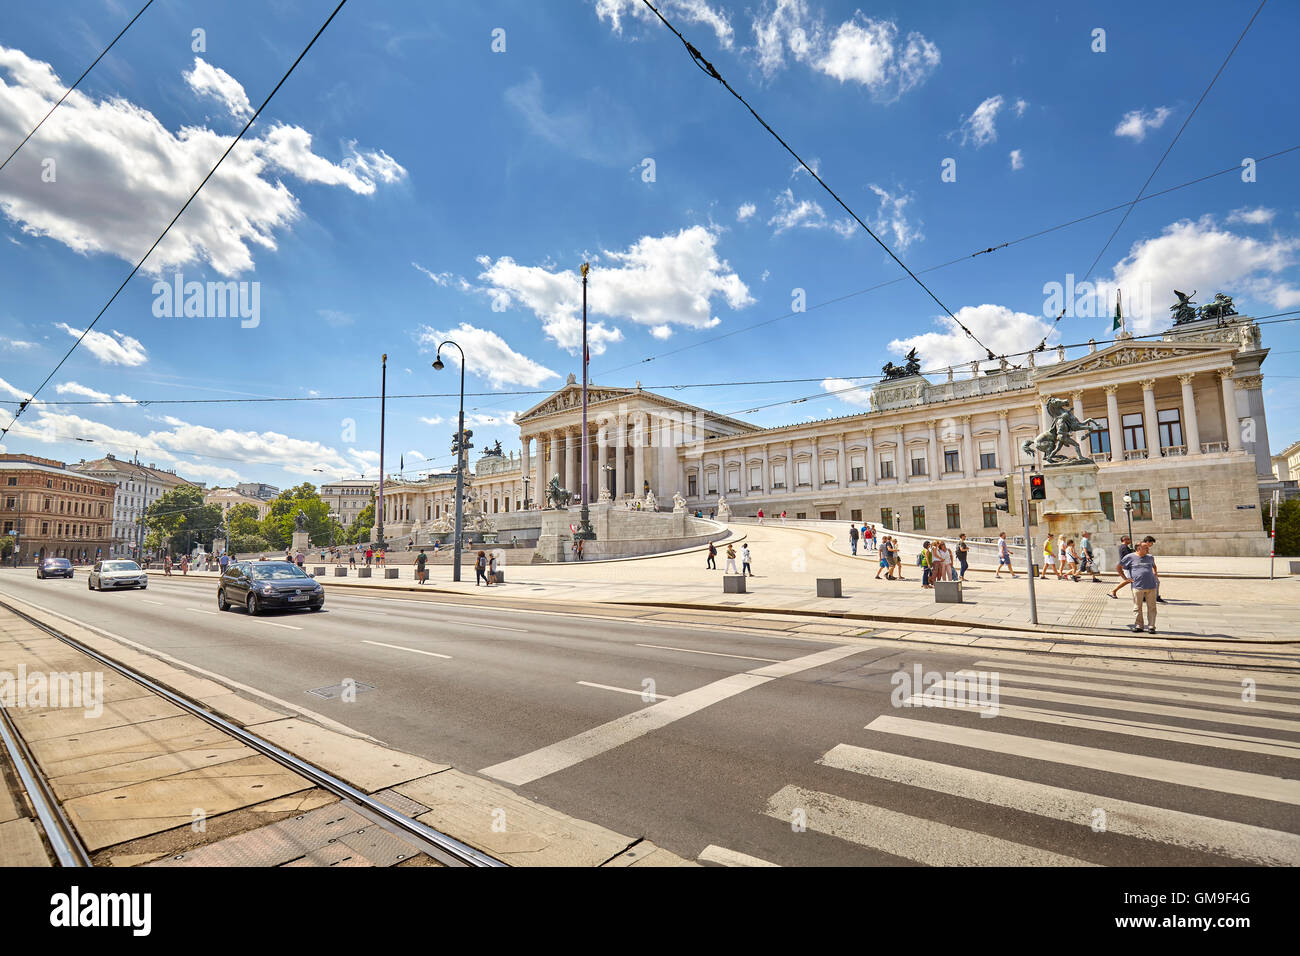 Vienna, Austria - August 14, 2016: Street in front of the Austrian Parliament Building. Stock Photo